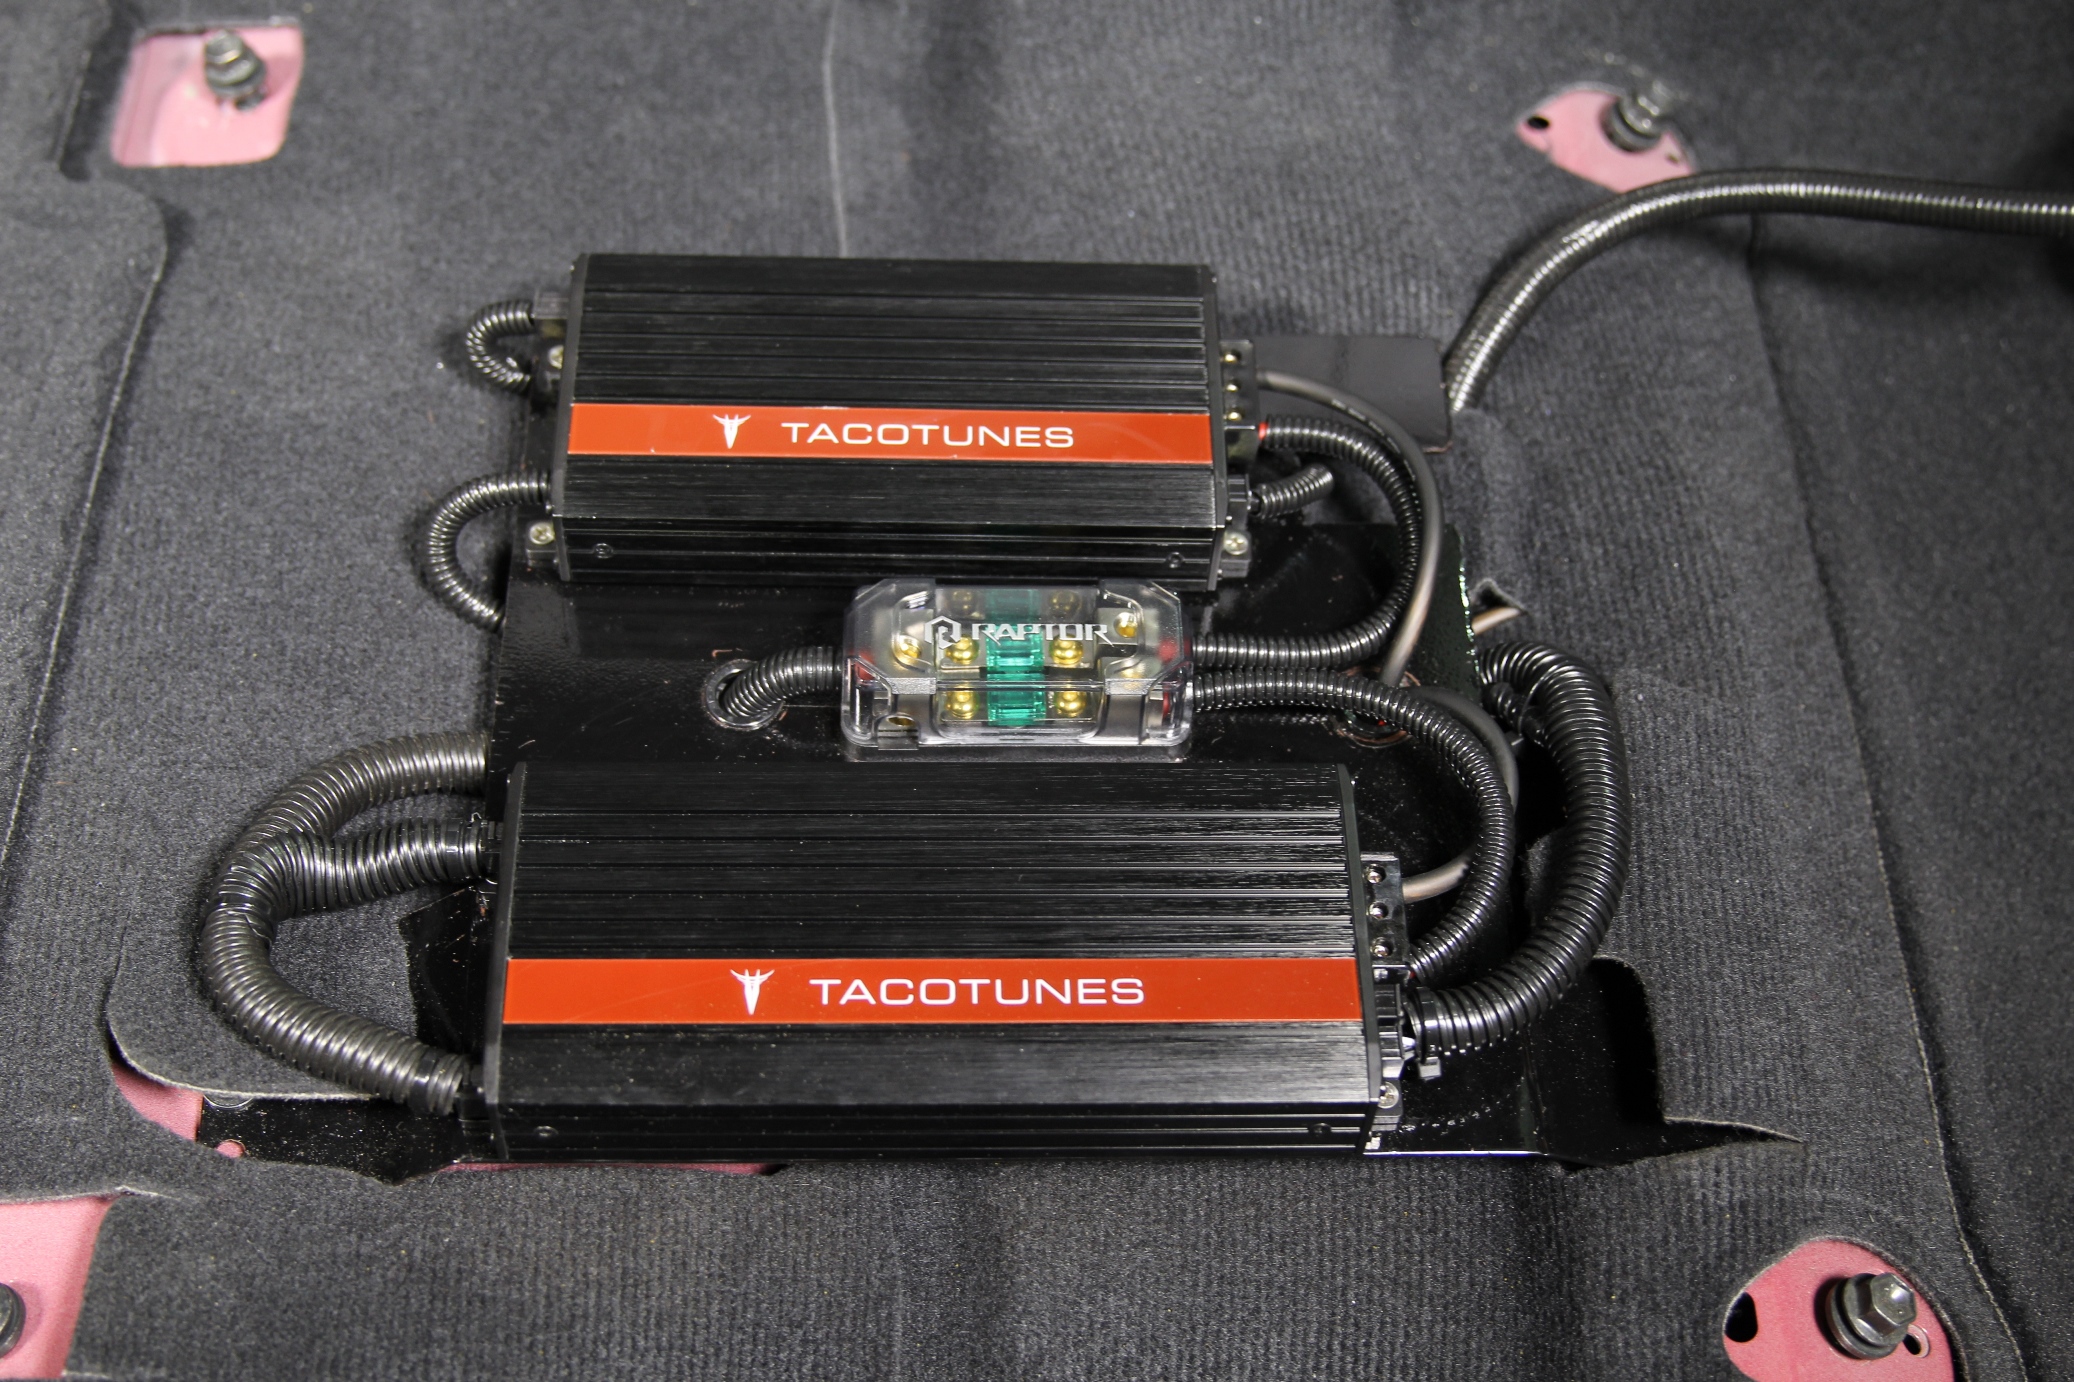 Wiring Rear Subwoofer Diagram Jbl System 2015 - 17 Camry from tacotunes.com